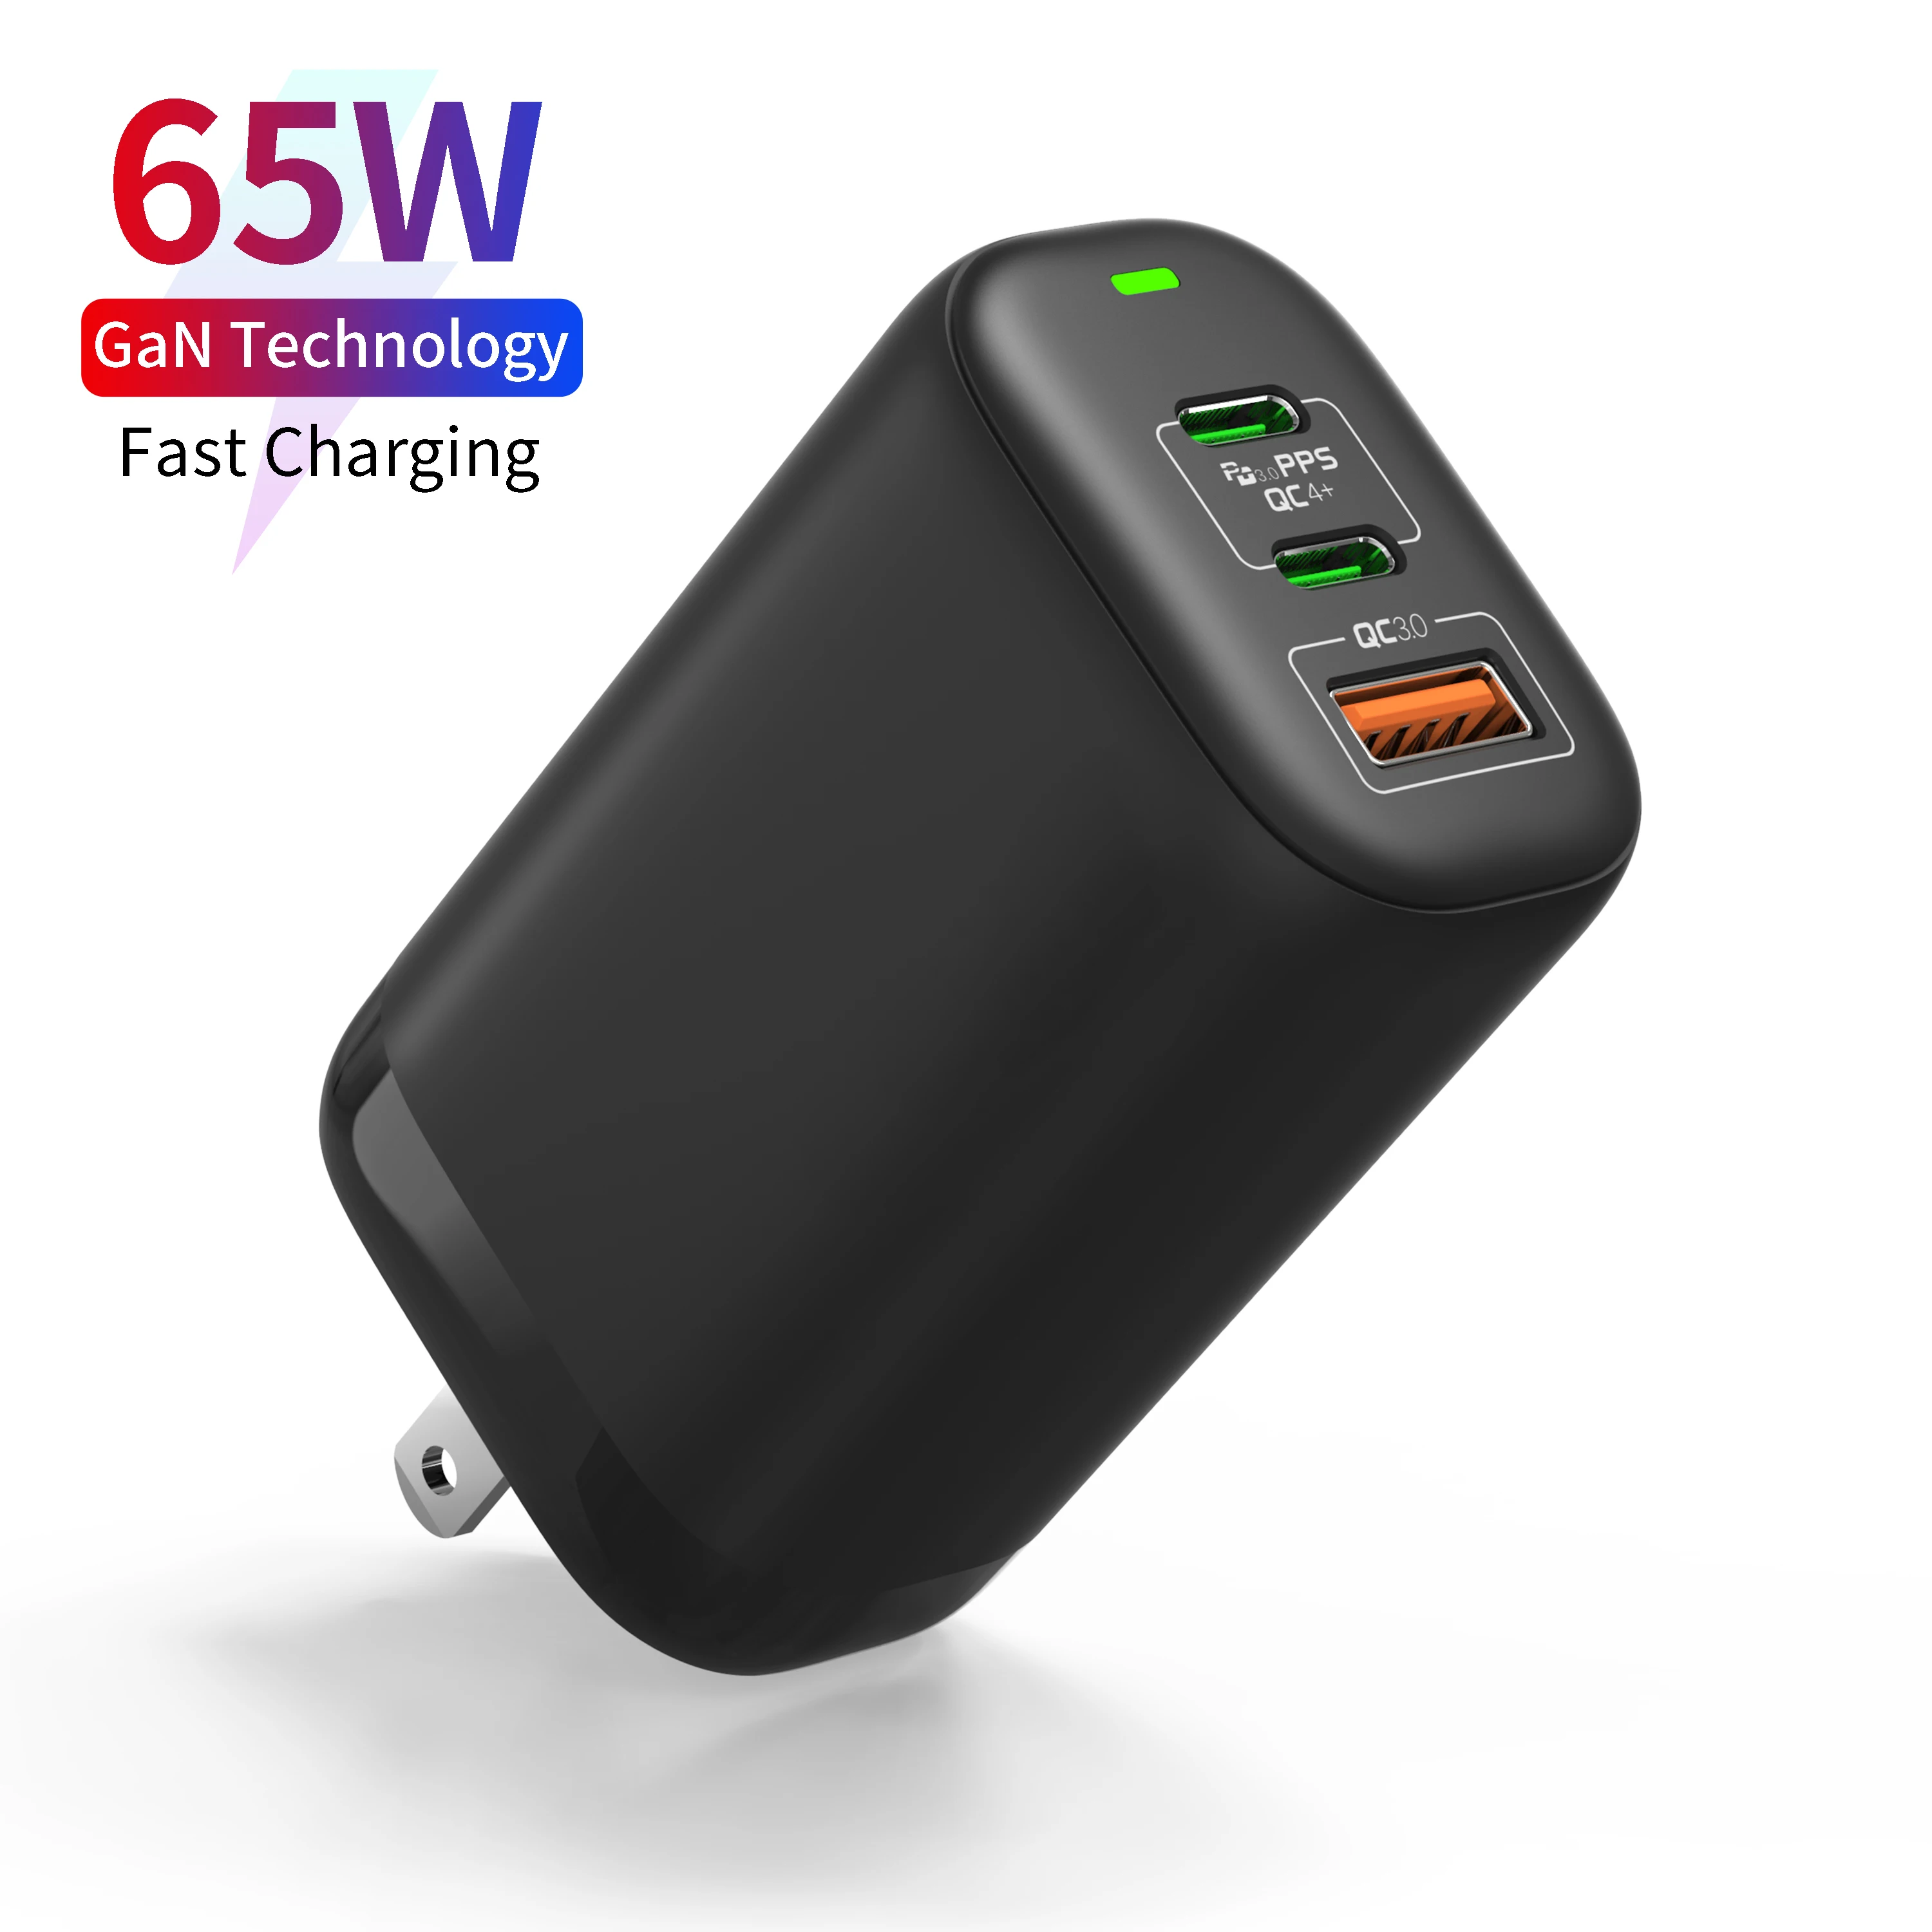 

Good Quality 65W GaN Charger PD 3.0 QC 4.0 Type C Portable Iphone Charger Fast Charger Power Delivery For Laptop Macbook Airpad